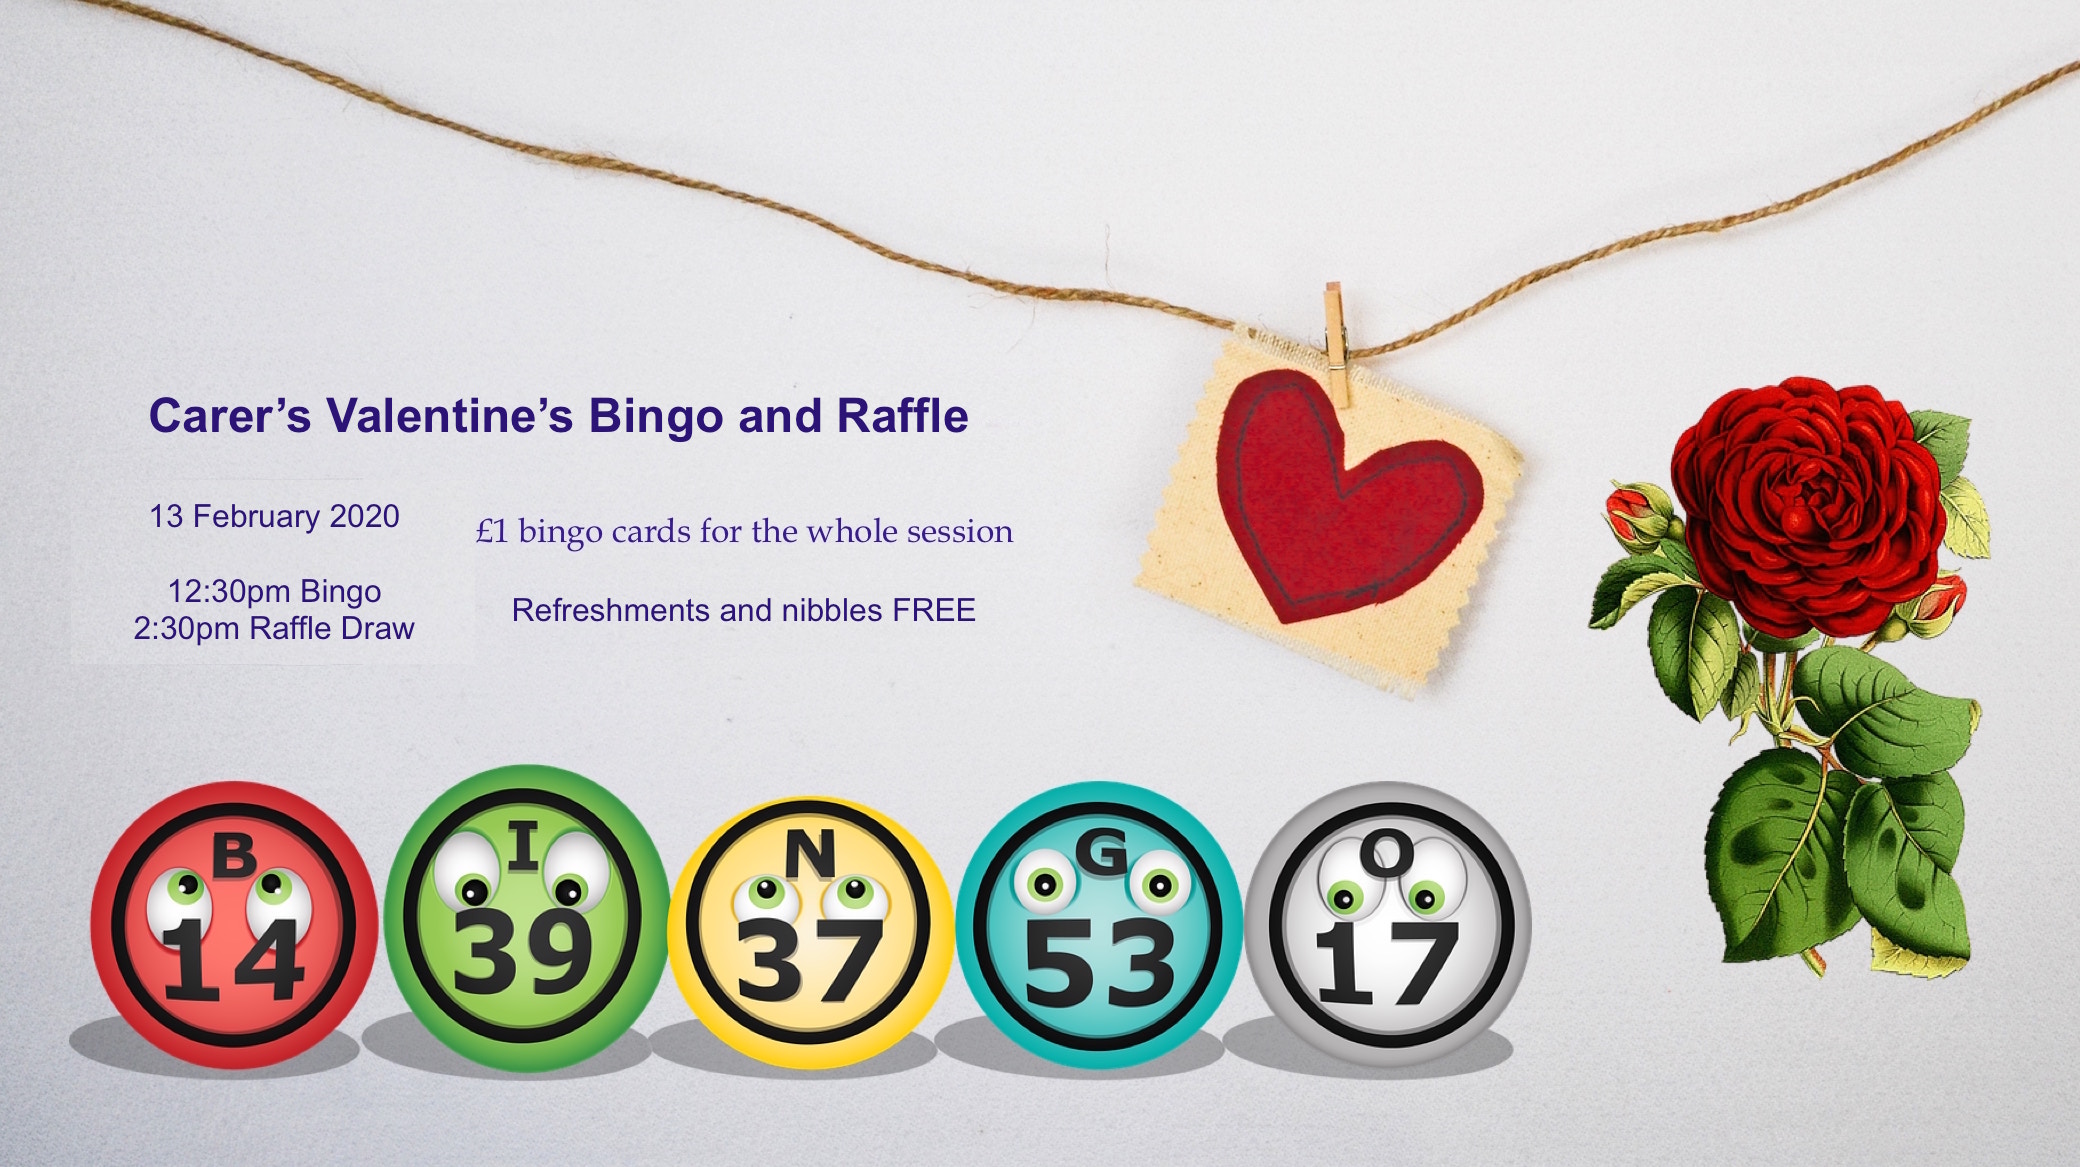 Poster for Lifted Carers' Valentine's Bingo and Raffle 2020 | background image: heart pendant; foreground images: rose, bingo balls | original images from pixabay.com and unsplash.com